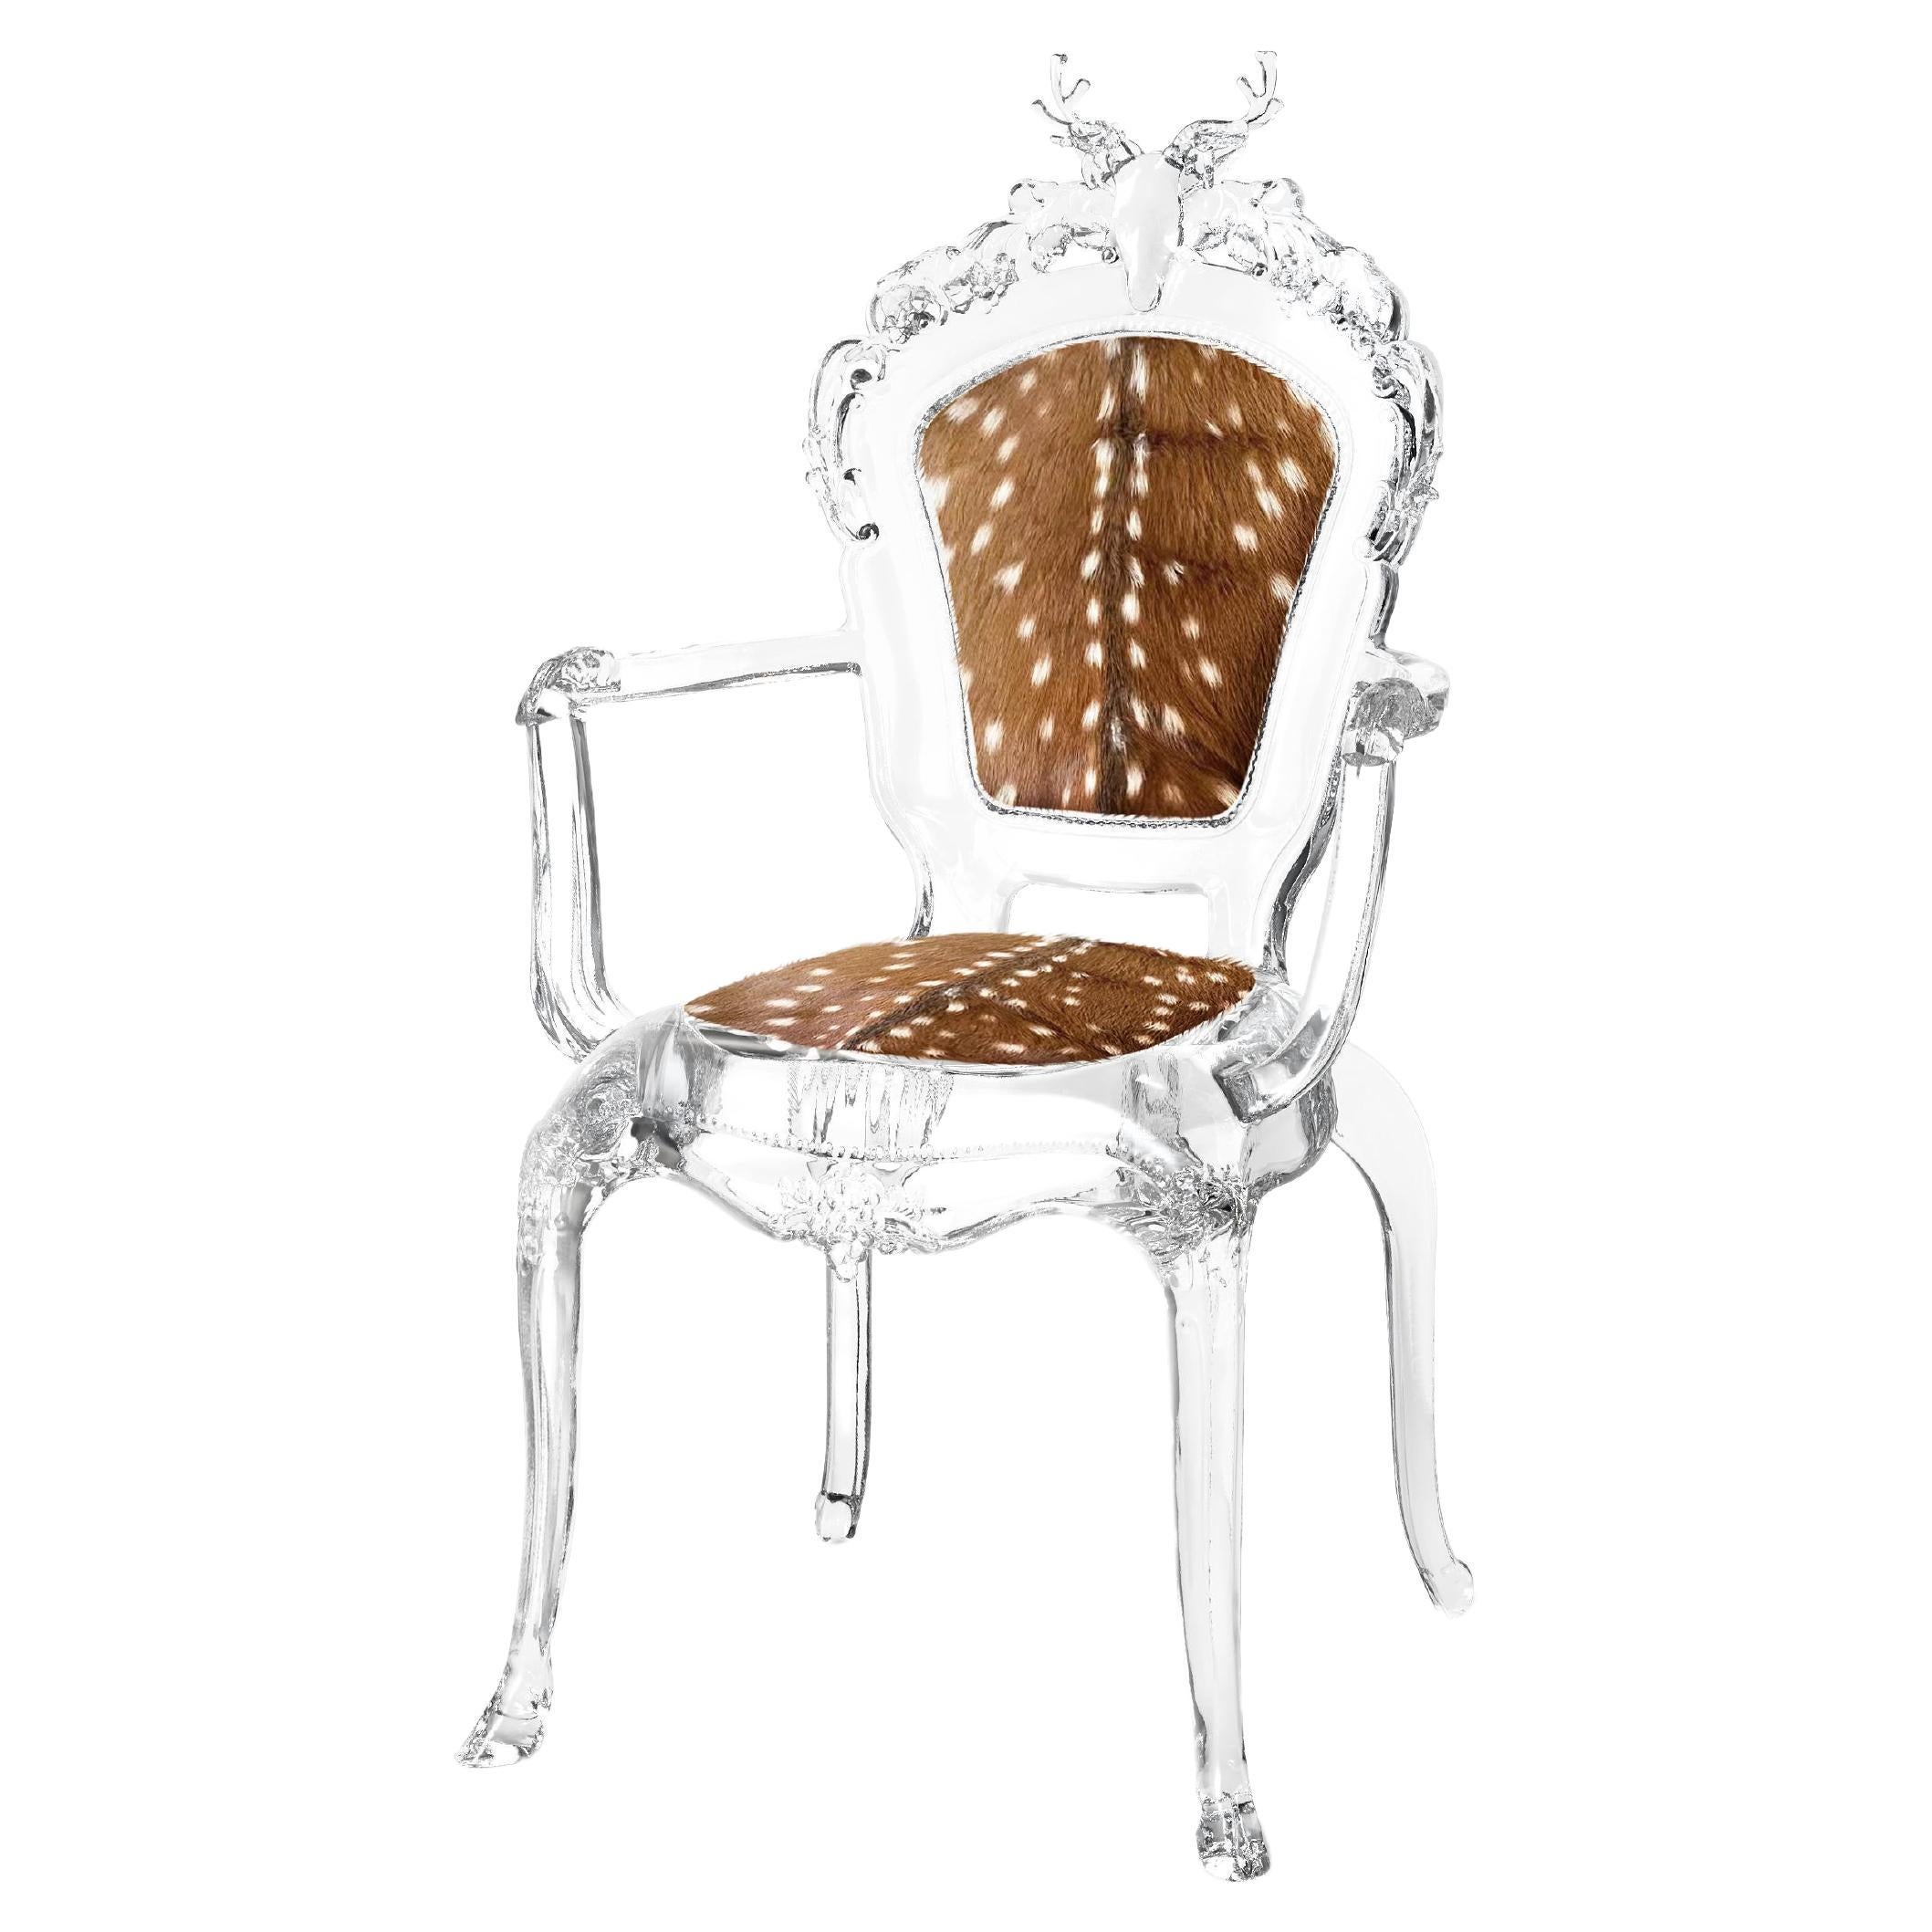 Deer Sculpture Art Chair, Rococo Style Antique Chair with Crystal by GORDON GU For Sale